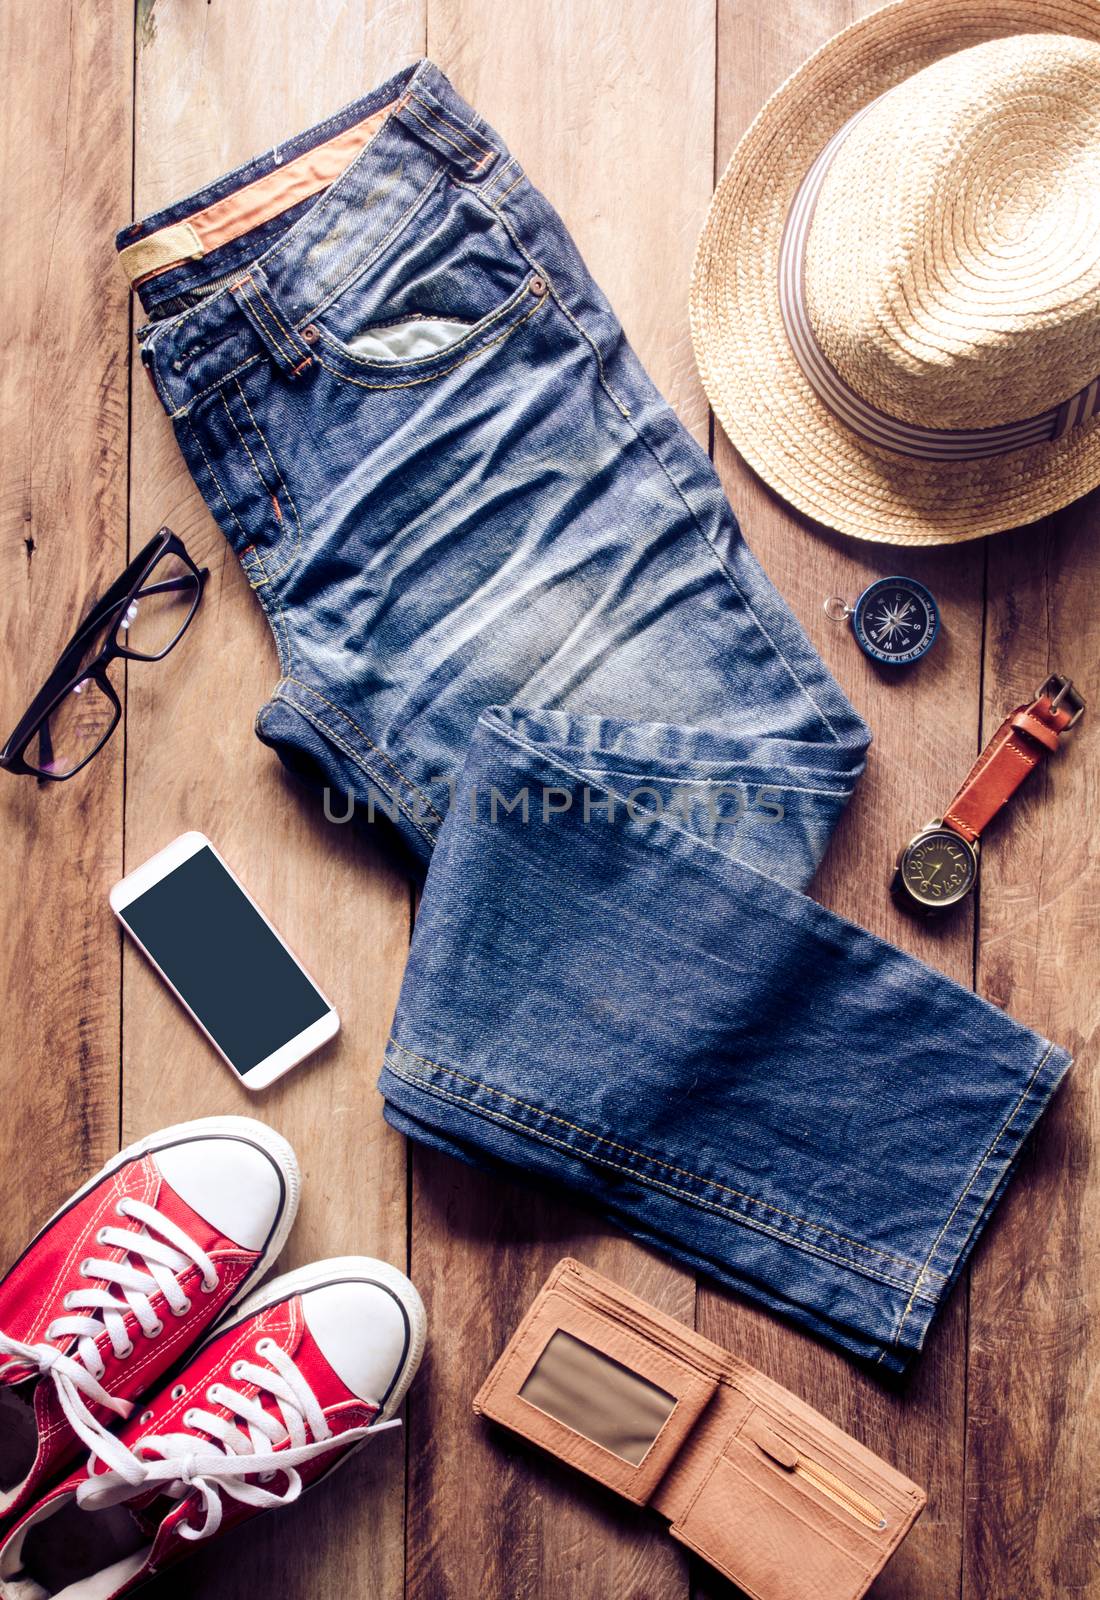 Clothing and accessories for travel on wooden floor - concept lifestyle